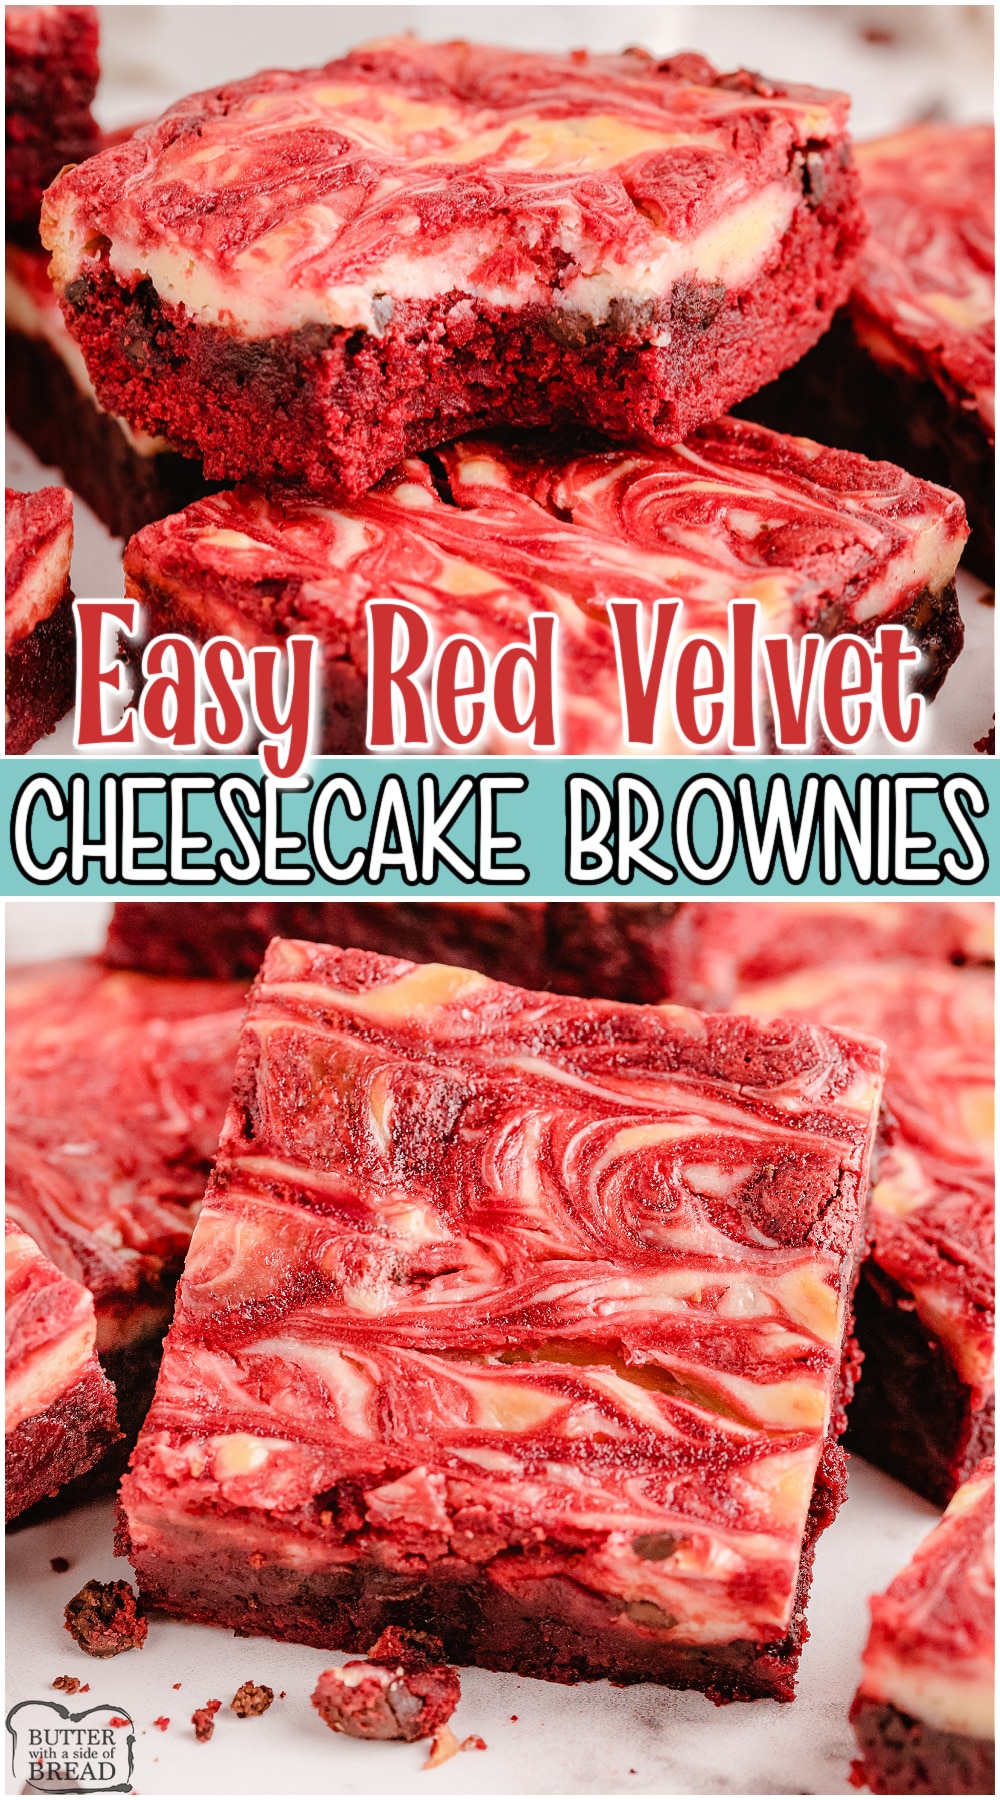 Red Velvet Cheesecake Brownies are delectable, from scratch brownies with a sweet, creamy cheesecake swirl. Decadent, fudgy brownies with double the chocolate for the perfect red velvet flavor. 